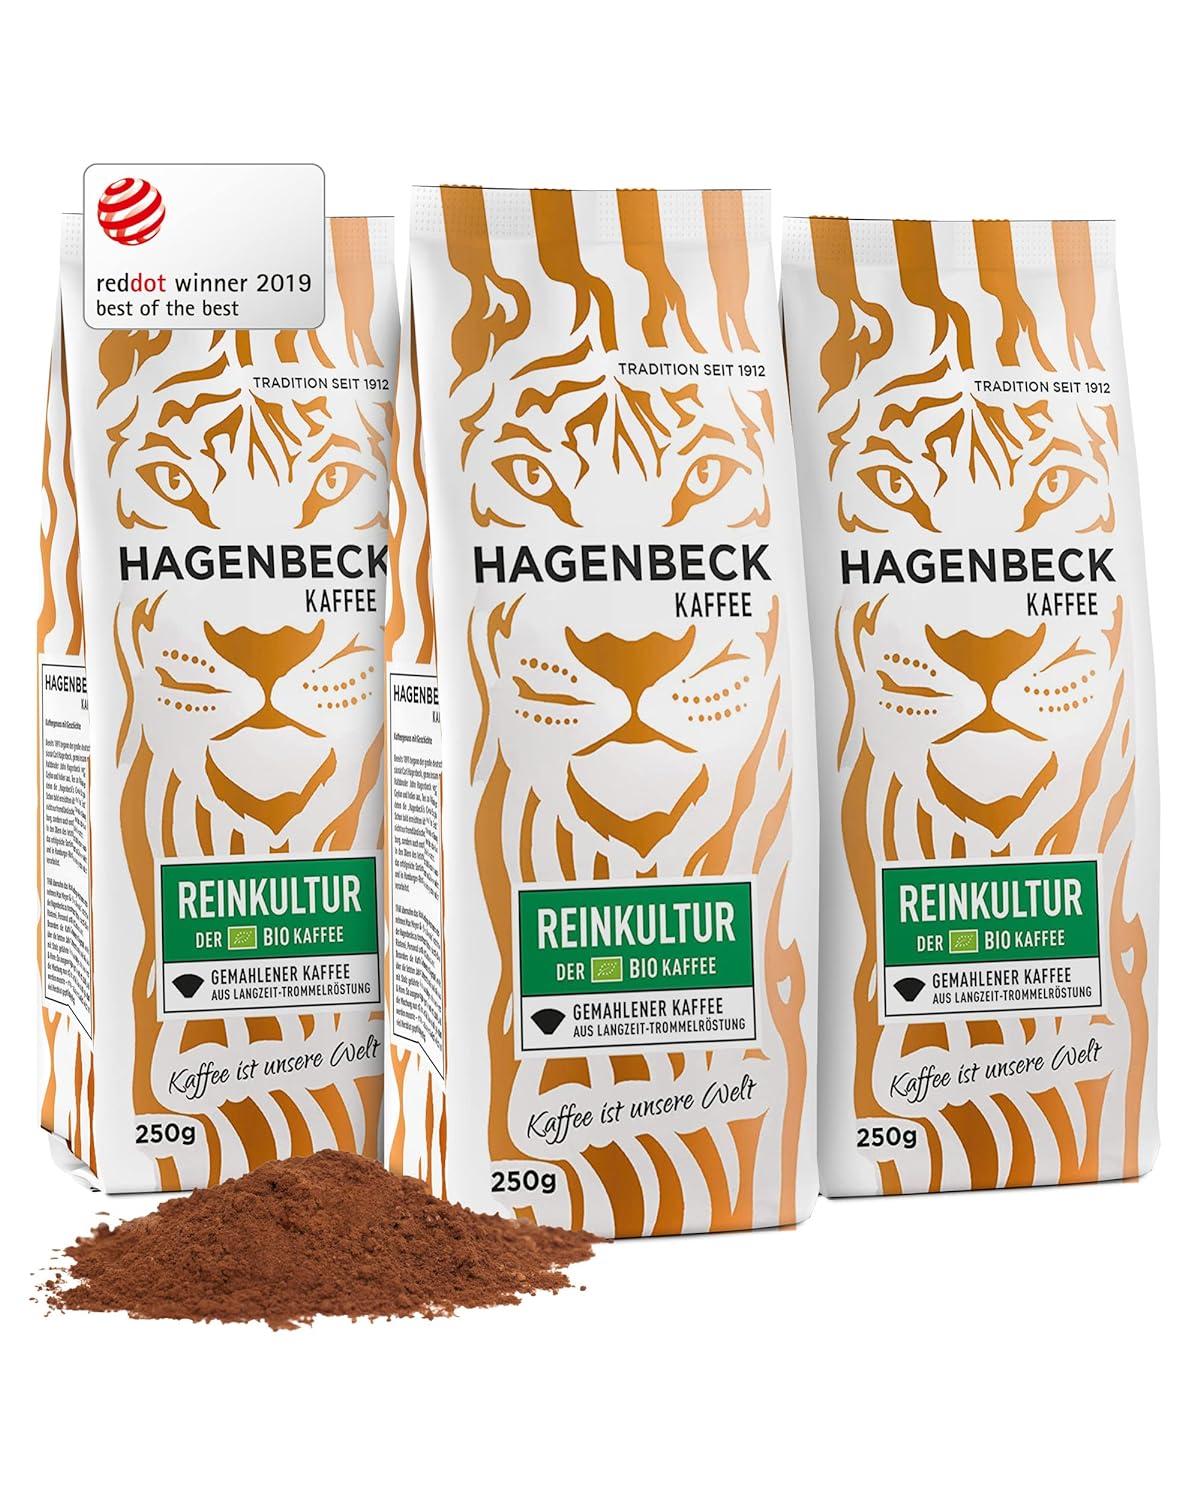 Hagenbeck Organic Pure Culture 3x250g (750g) | Organic Coffee Ground & Classic Aromatic | Moderate Intensity | Ground coffee from German roasting | 100% Arabica blend made from organic coffee beans
